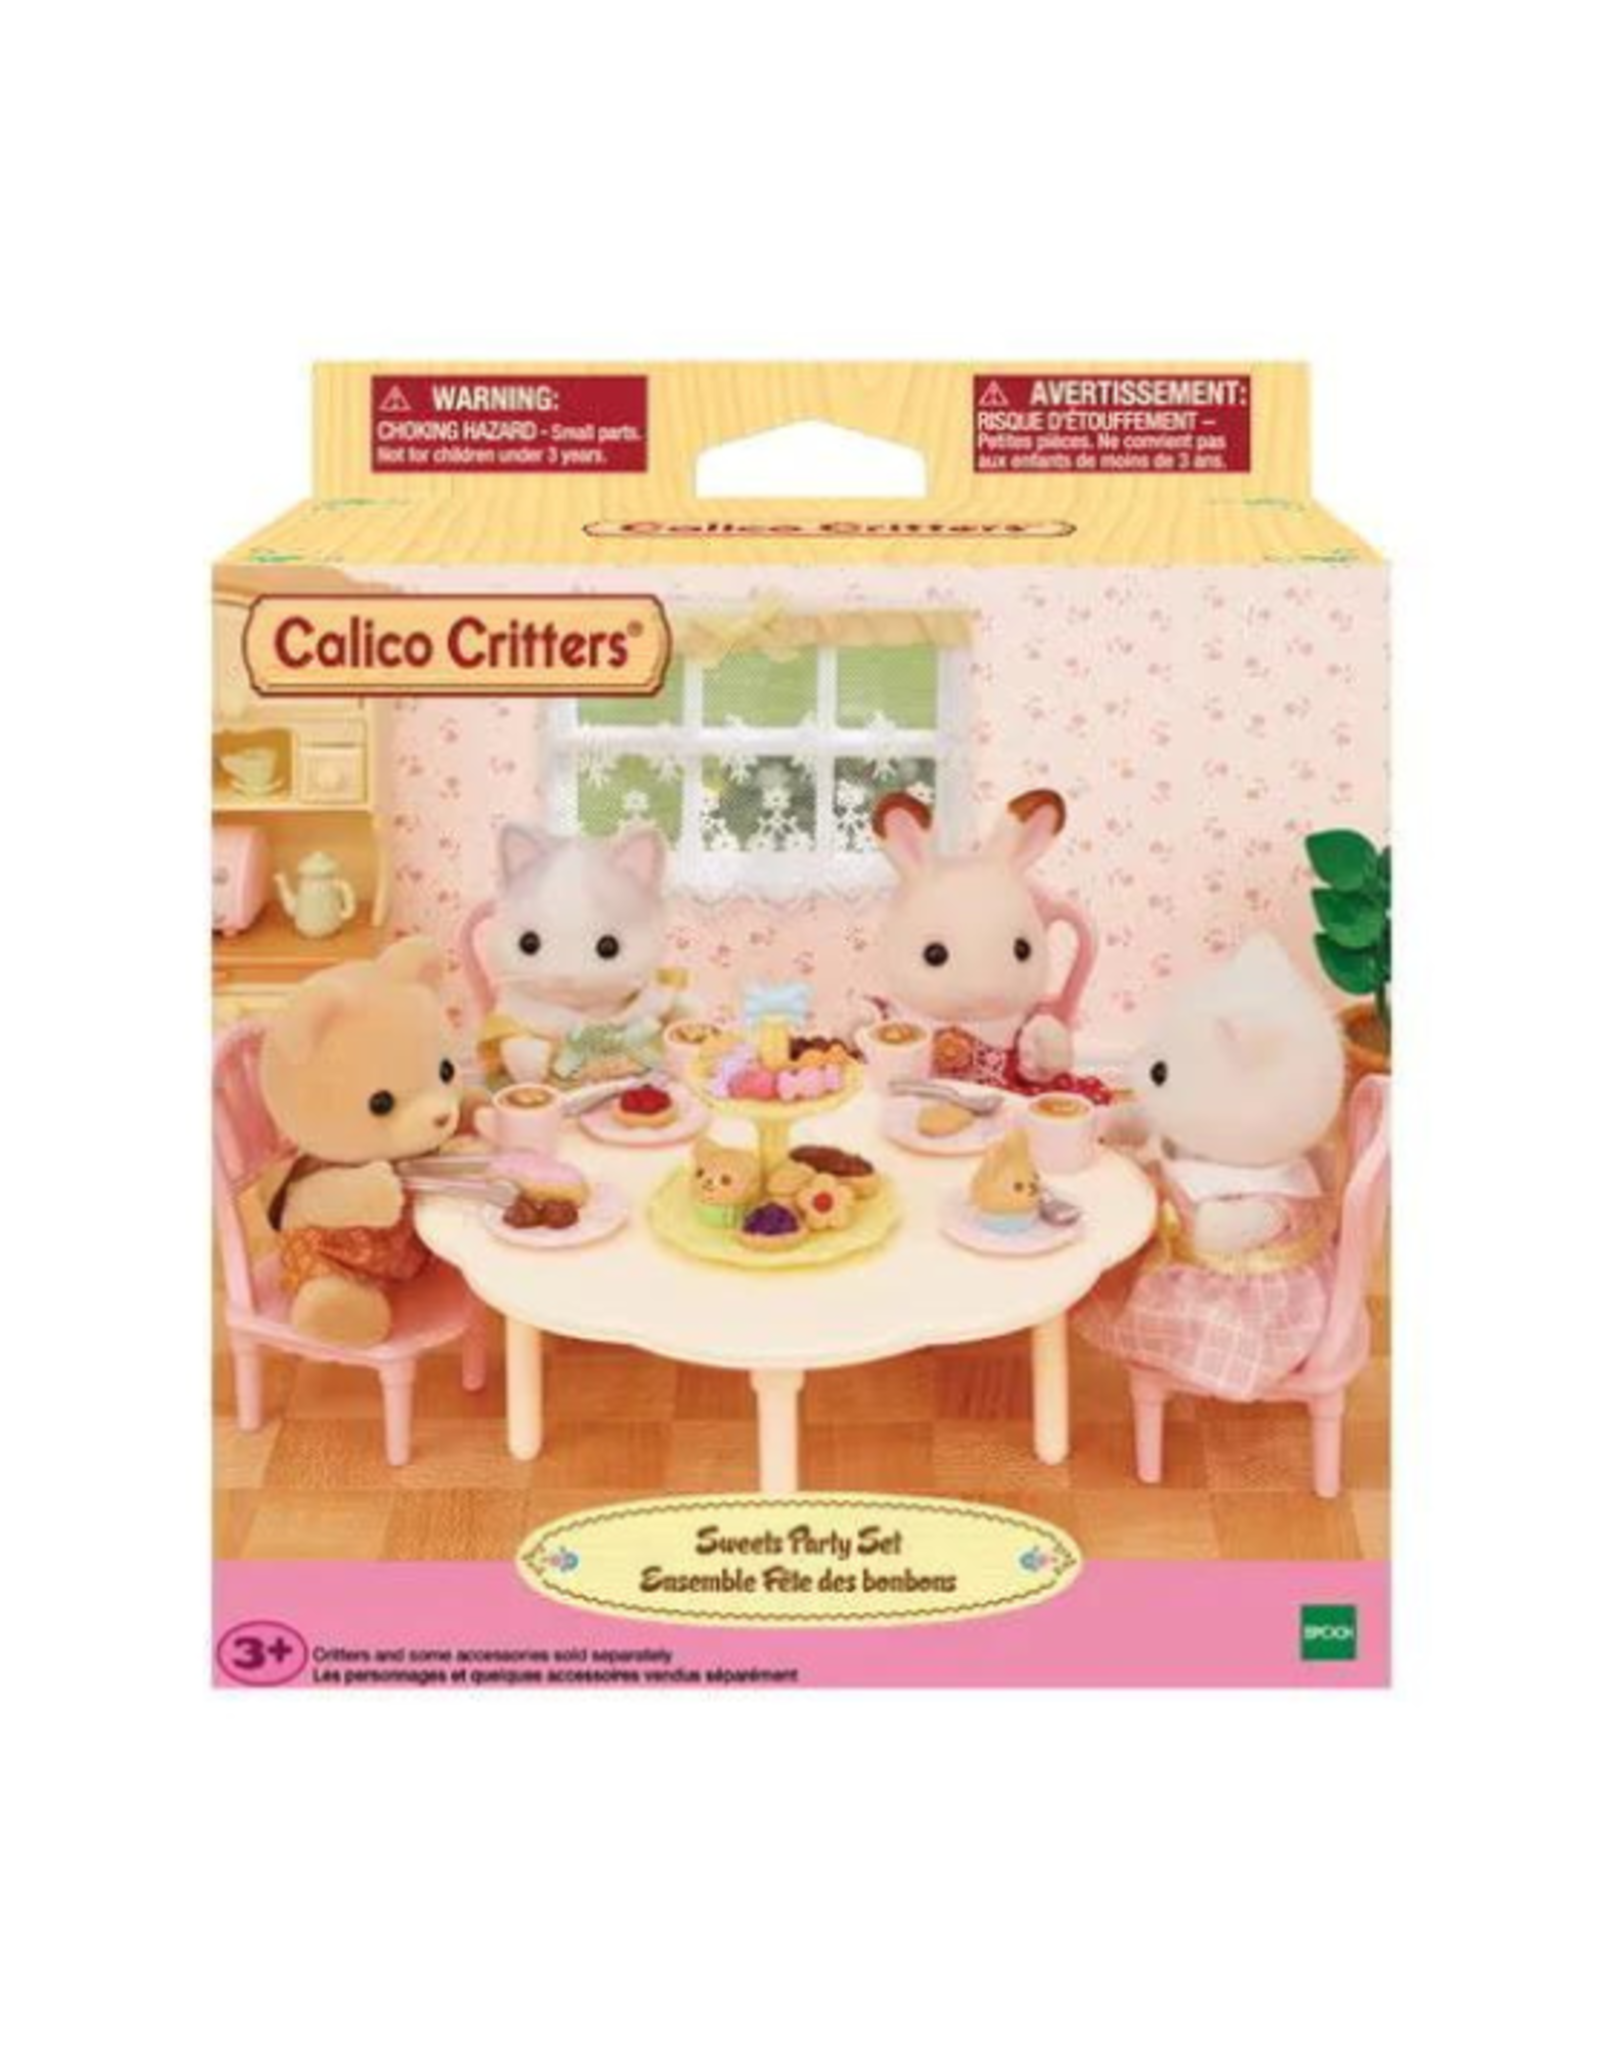 Calico Critters Calico Critters - Sweets Party Set